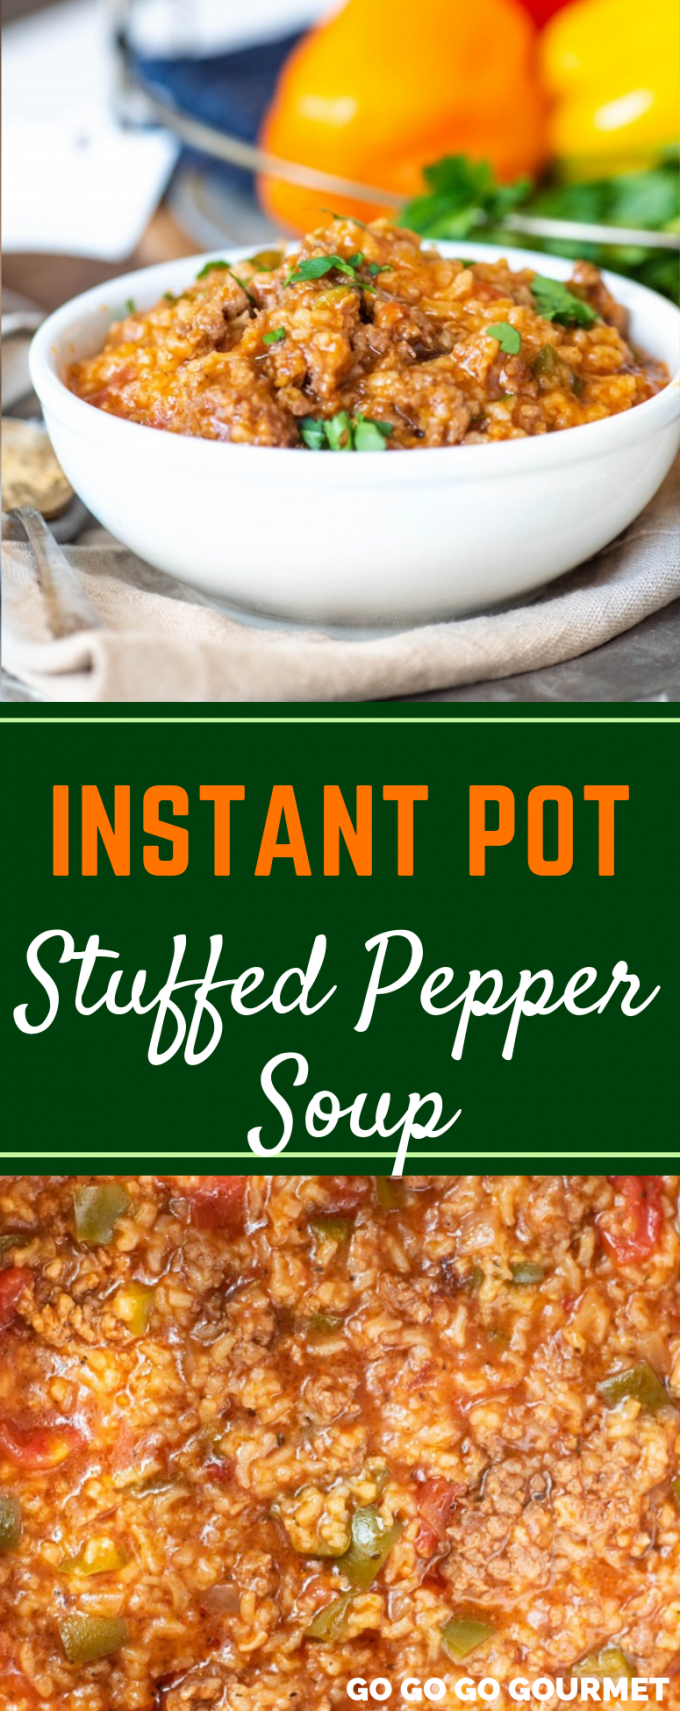 Even better than the Skinny Taste or Allrecipes recipes, this easy Instant Pot Stuffed Pepper Soup recipe is the best! It's the ultimate comfort food for cold weather! Making soup in the Instant Pot is so much quicker than the crockpot or on the stovetop! #gogogogourmet #instantpotstuffedpeppersoup #easyinstantpotrecipes #stuffedpeppersoup #comfortfoodrecipes via @gogogogourmet